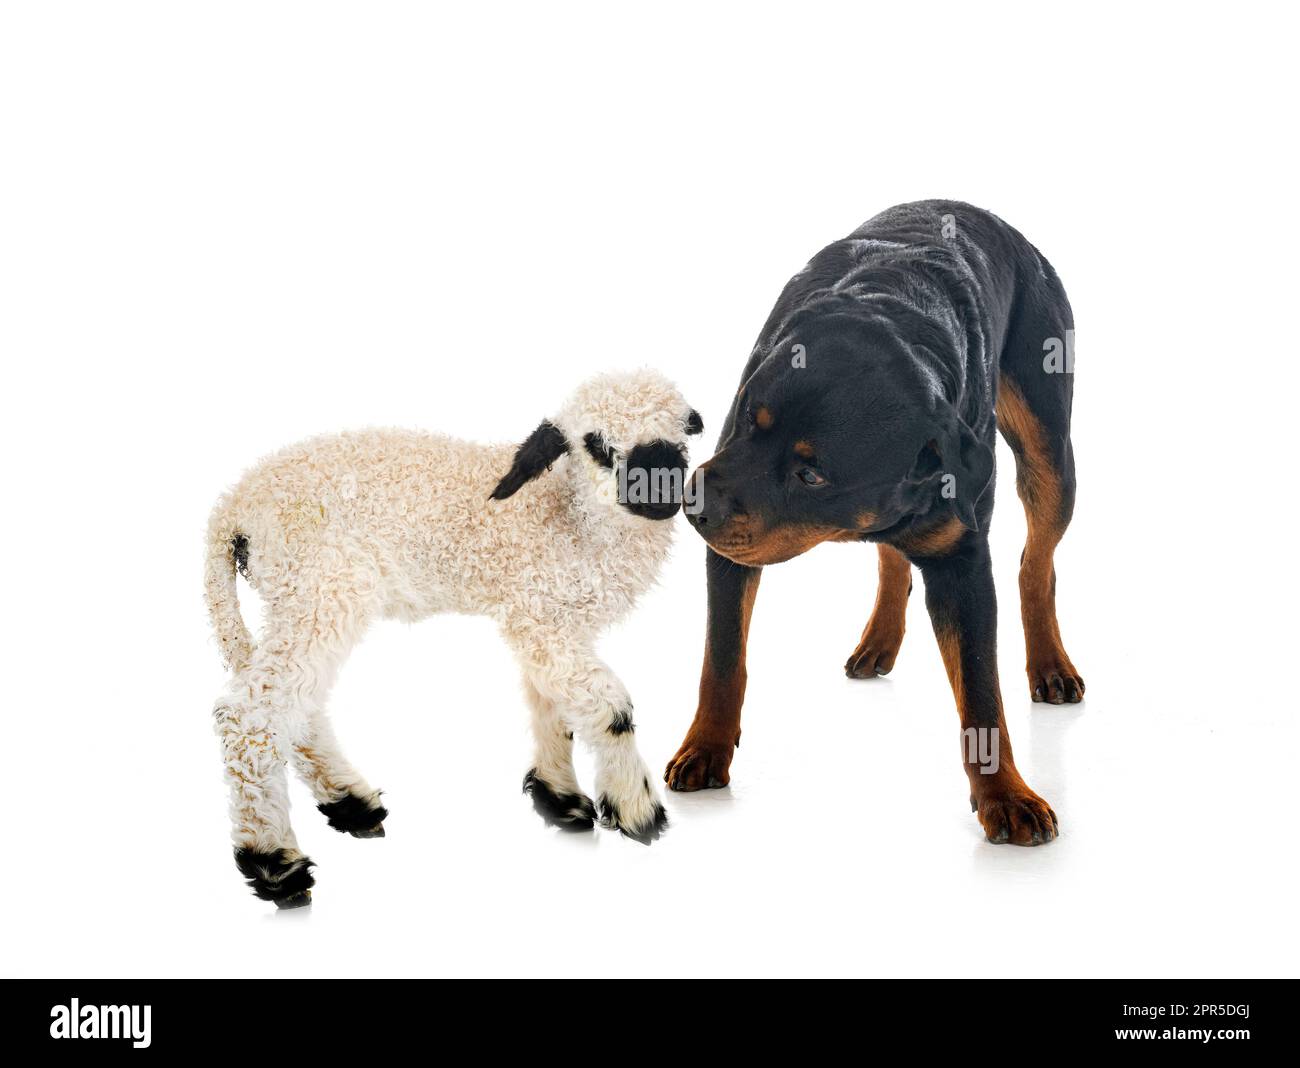 lamb Valais Blacknose and rottweiler in front of white background Stock Photo